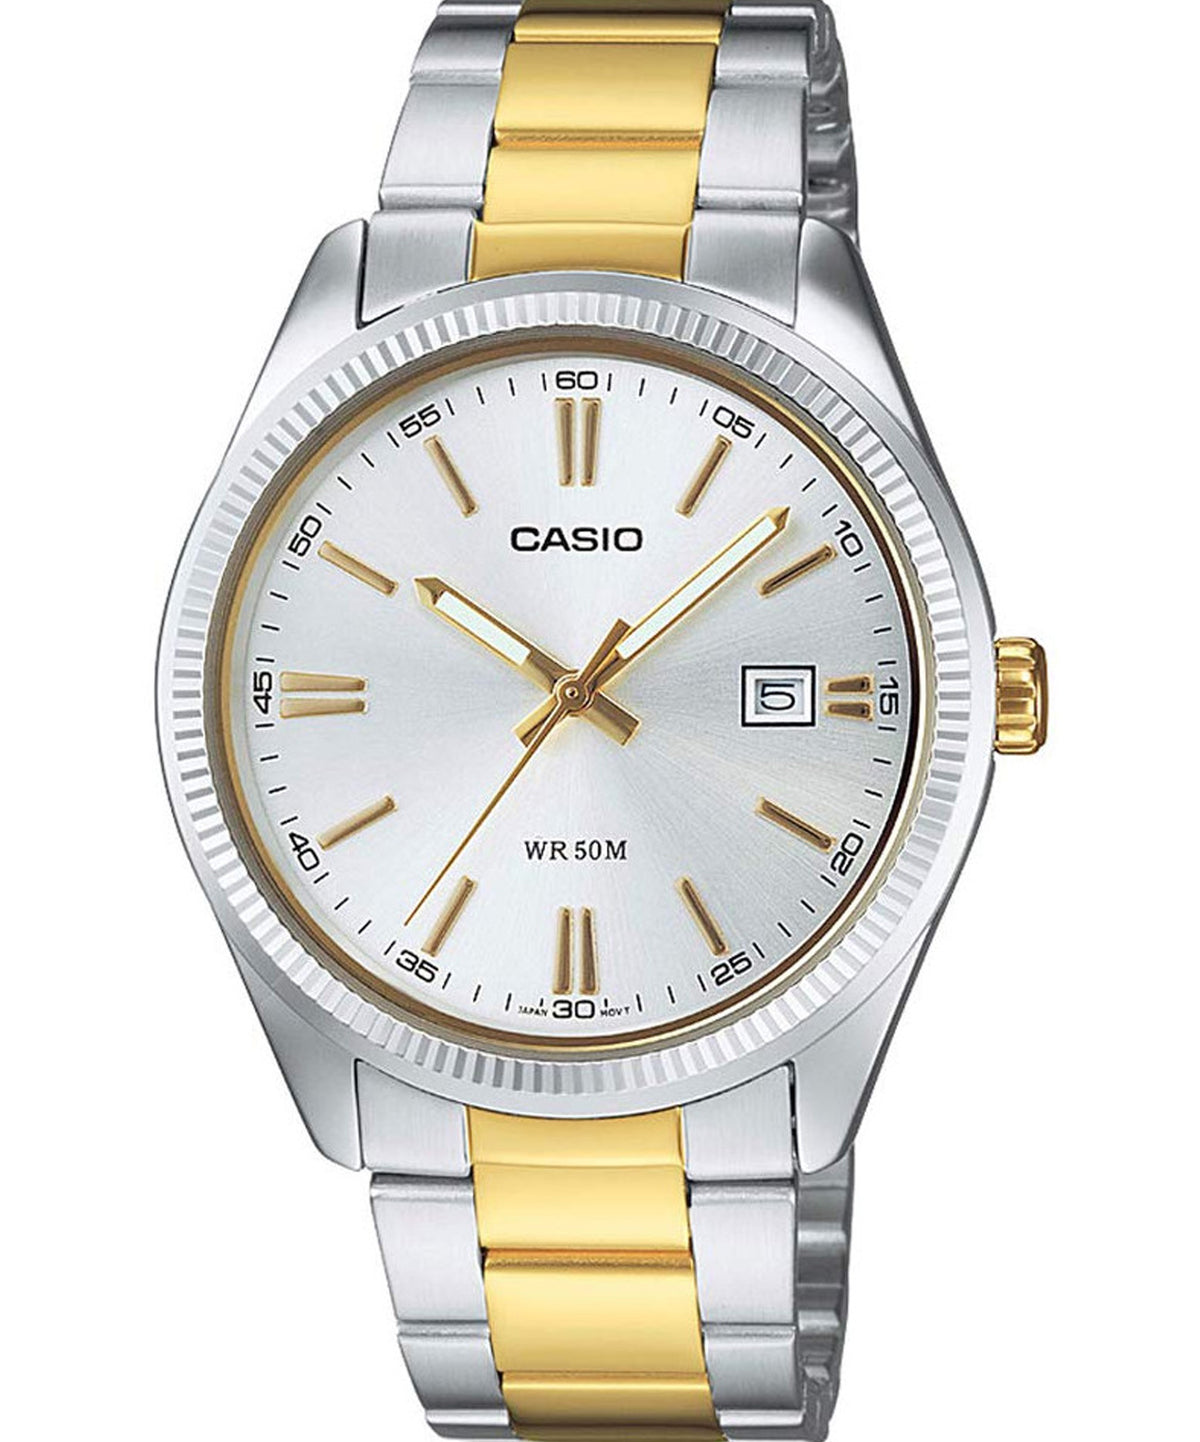 Casio Women's Watch Analog, Silver Dial Silver & Gold Stainless Steel Strap, LTP-1302SG-7AVD